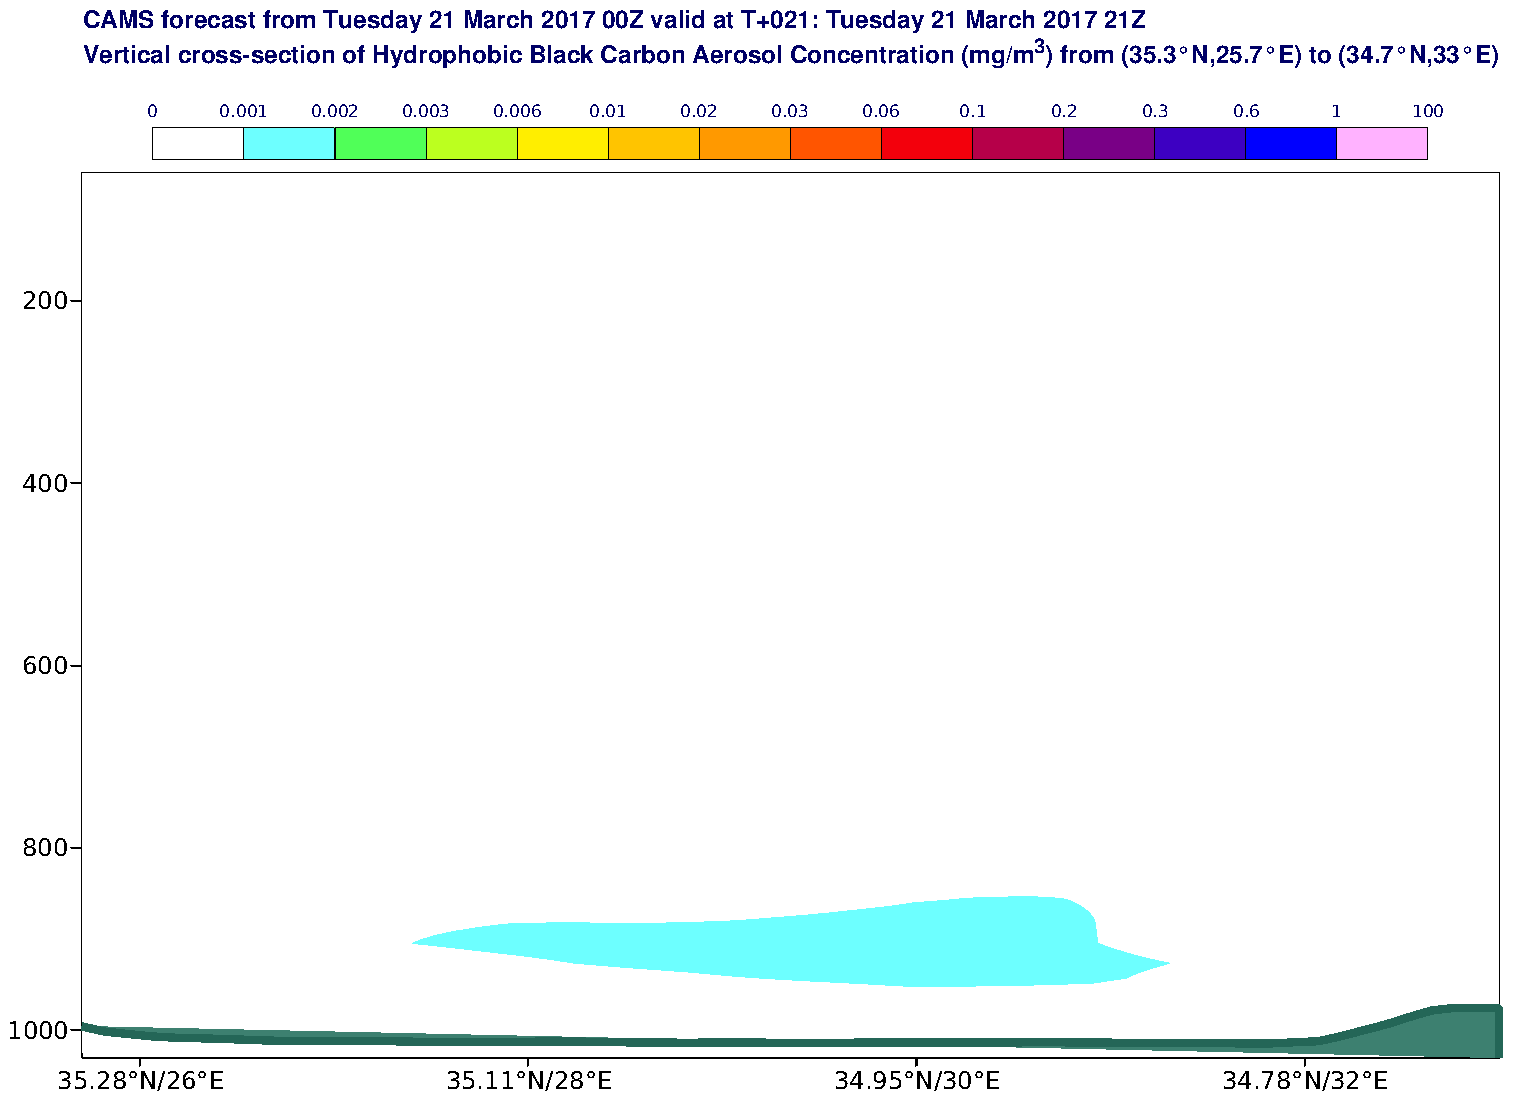 Vertical cross-section of Hydrophobic Black Carbon Aerosol Concentration (mg/m3) valid at T21 - 2017-03-21 21:00